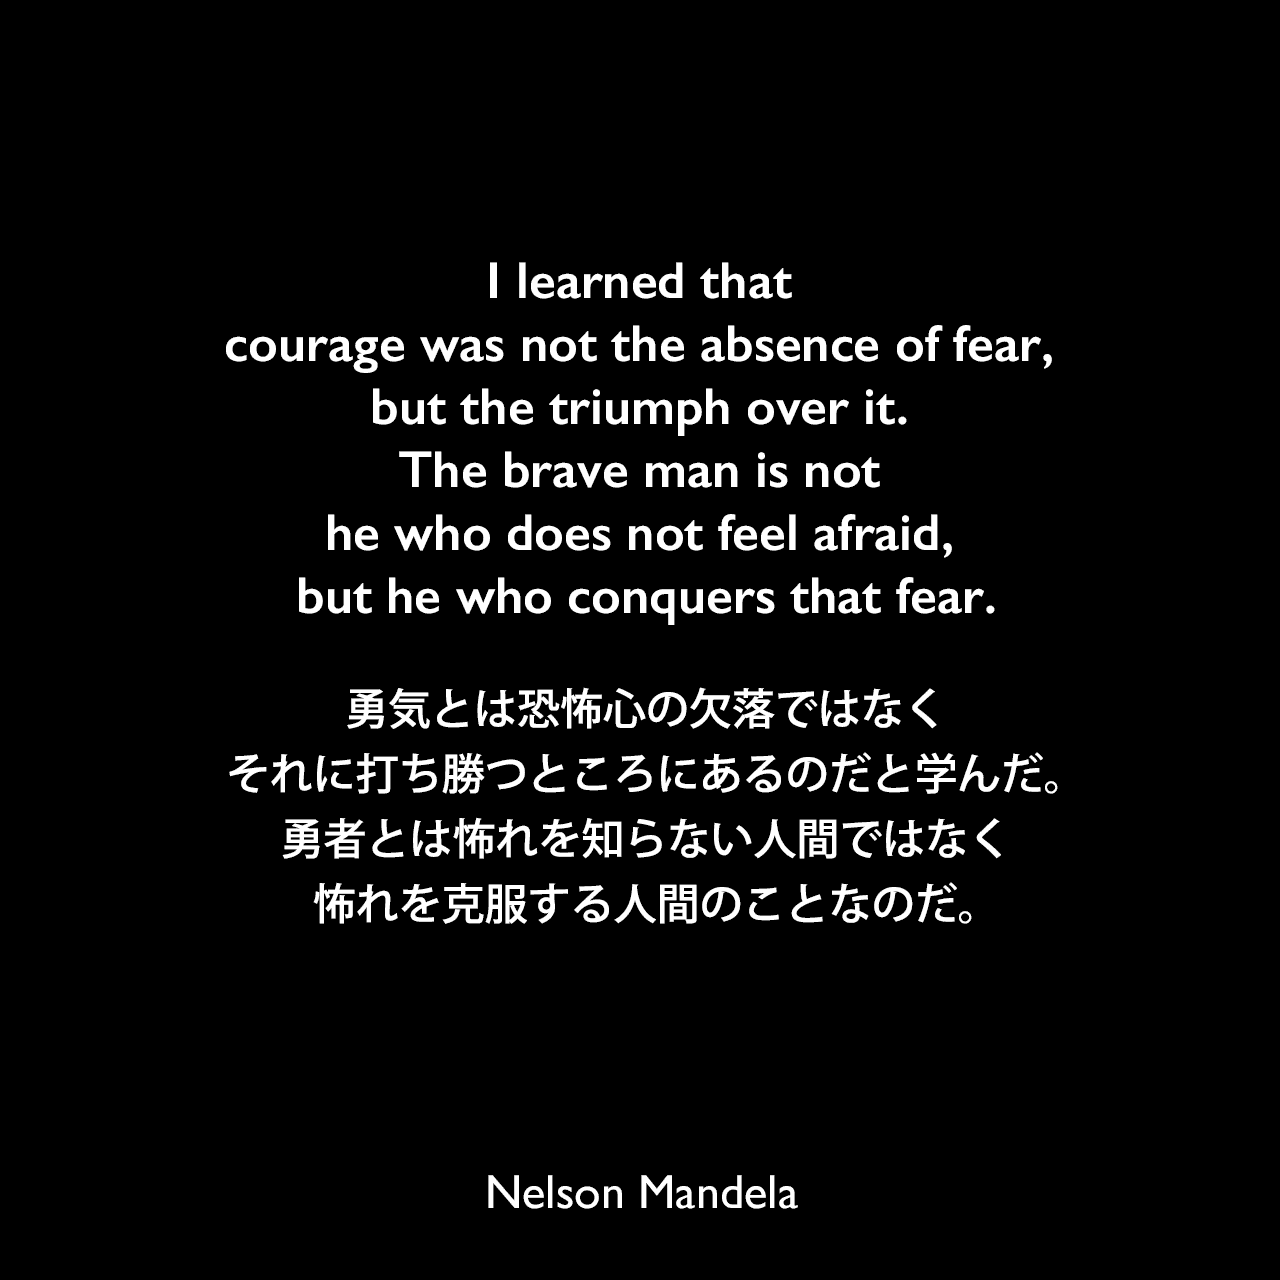 I learned that courage was not the absence of fear, but the triumph over it. The brave man is not he who does not feel afraid, but he who conquers that fear.勇気とは恐怖心の欠落ではなく、それに打ち勝つところにあるのだと学んだ。勇者とは怖れを知らない人間ではなく、怖れを克服する人間のことなのだ。- ネルソン・マンデラによる本「自由への長い道 ネルソン・マンデラ自伝」よりNelson Mandela